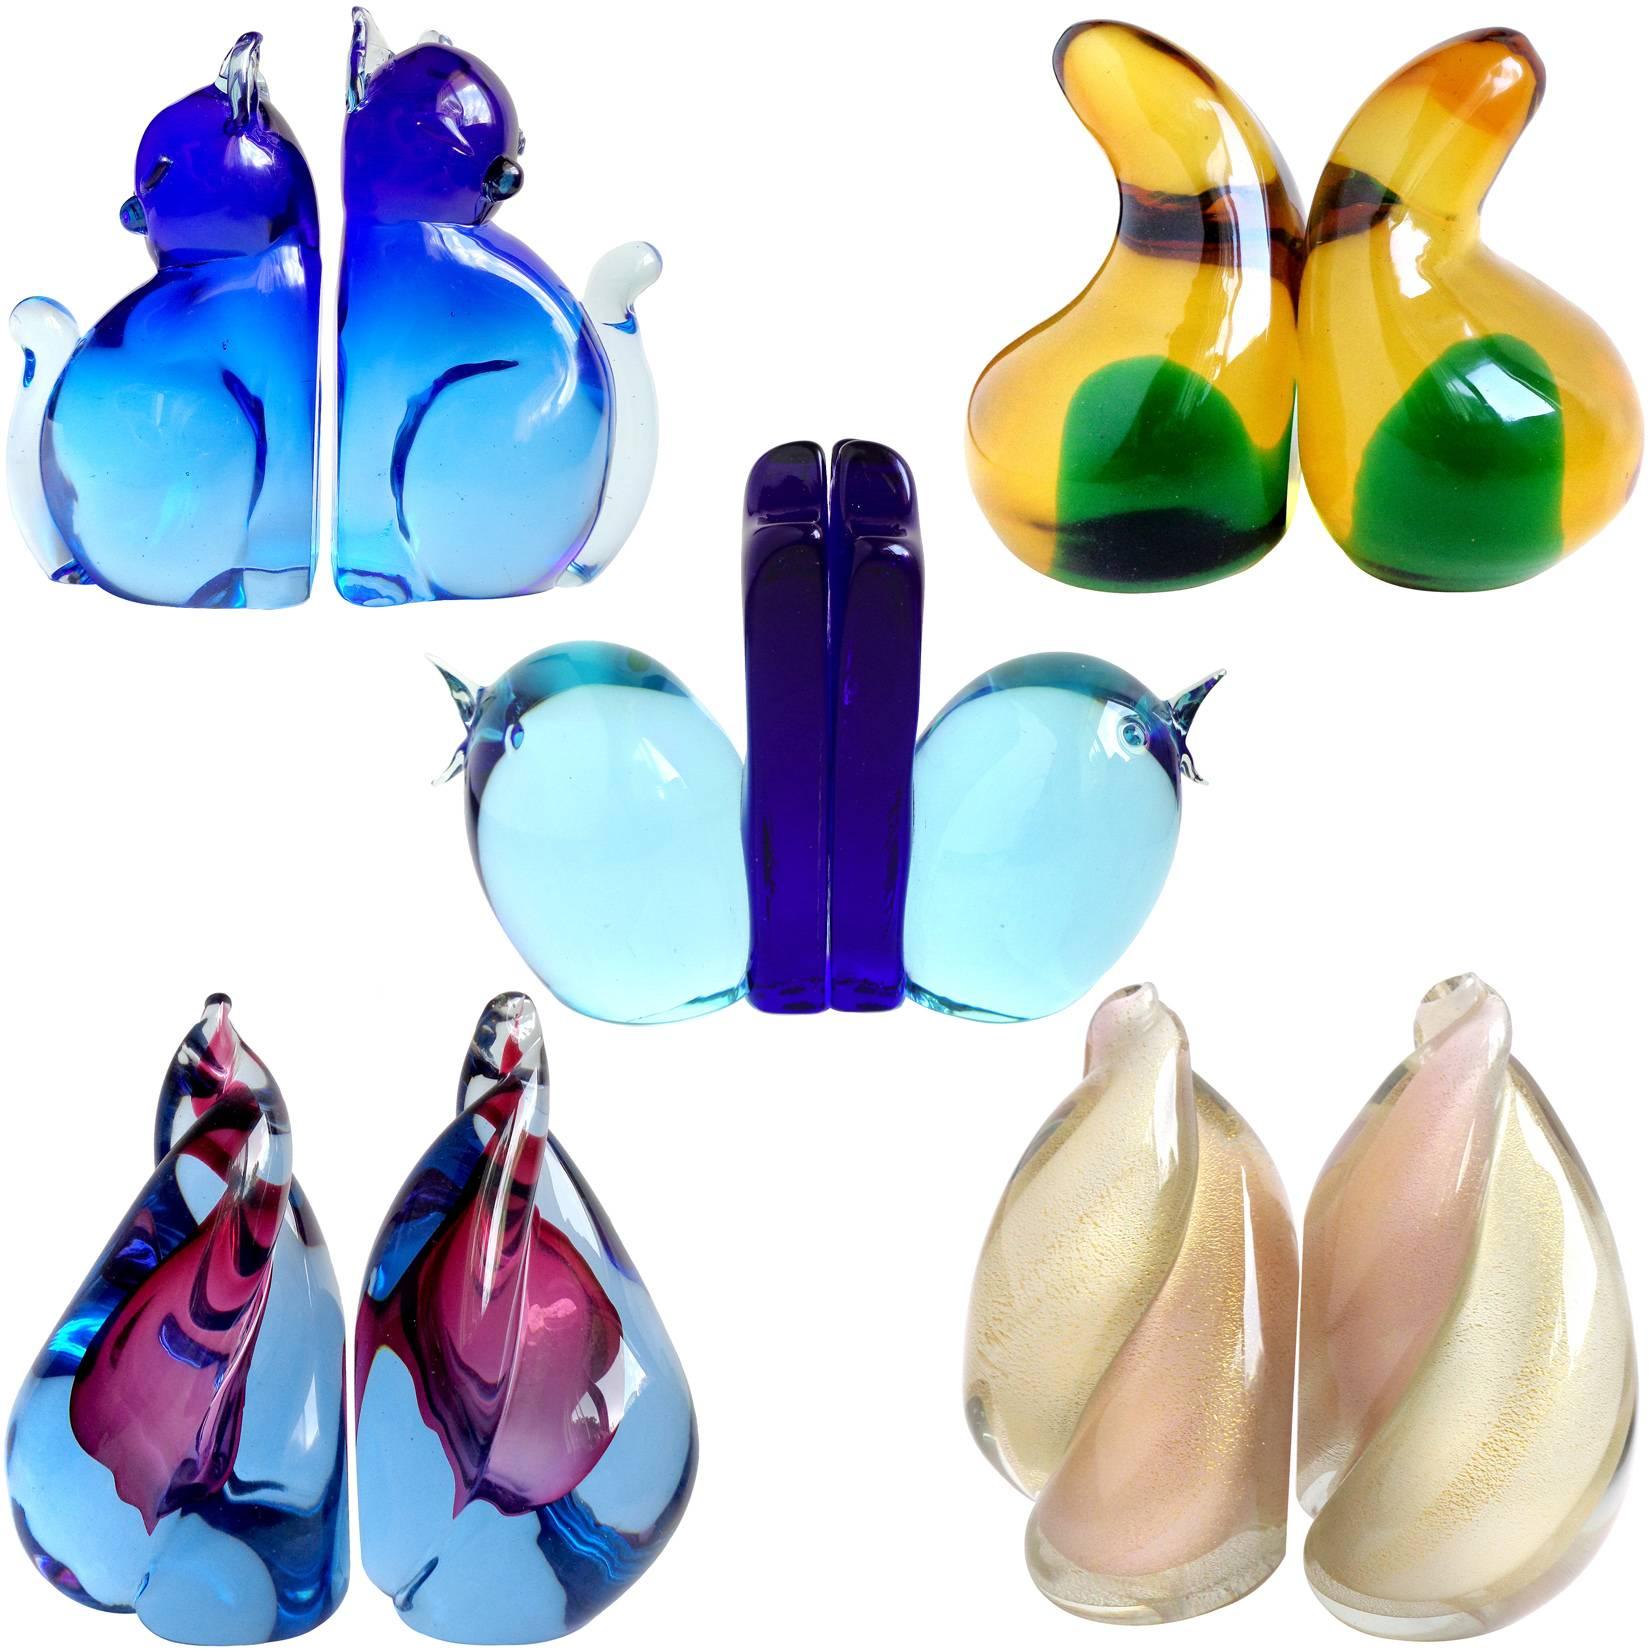 Hand-Crafted Archimede Seguso Murano Blue Sommerso Italian Art Glass Mouse Figural Bookends